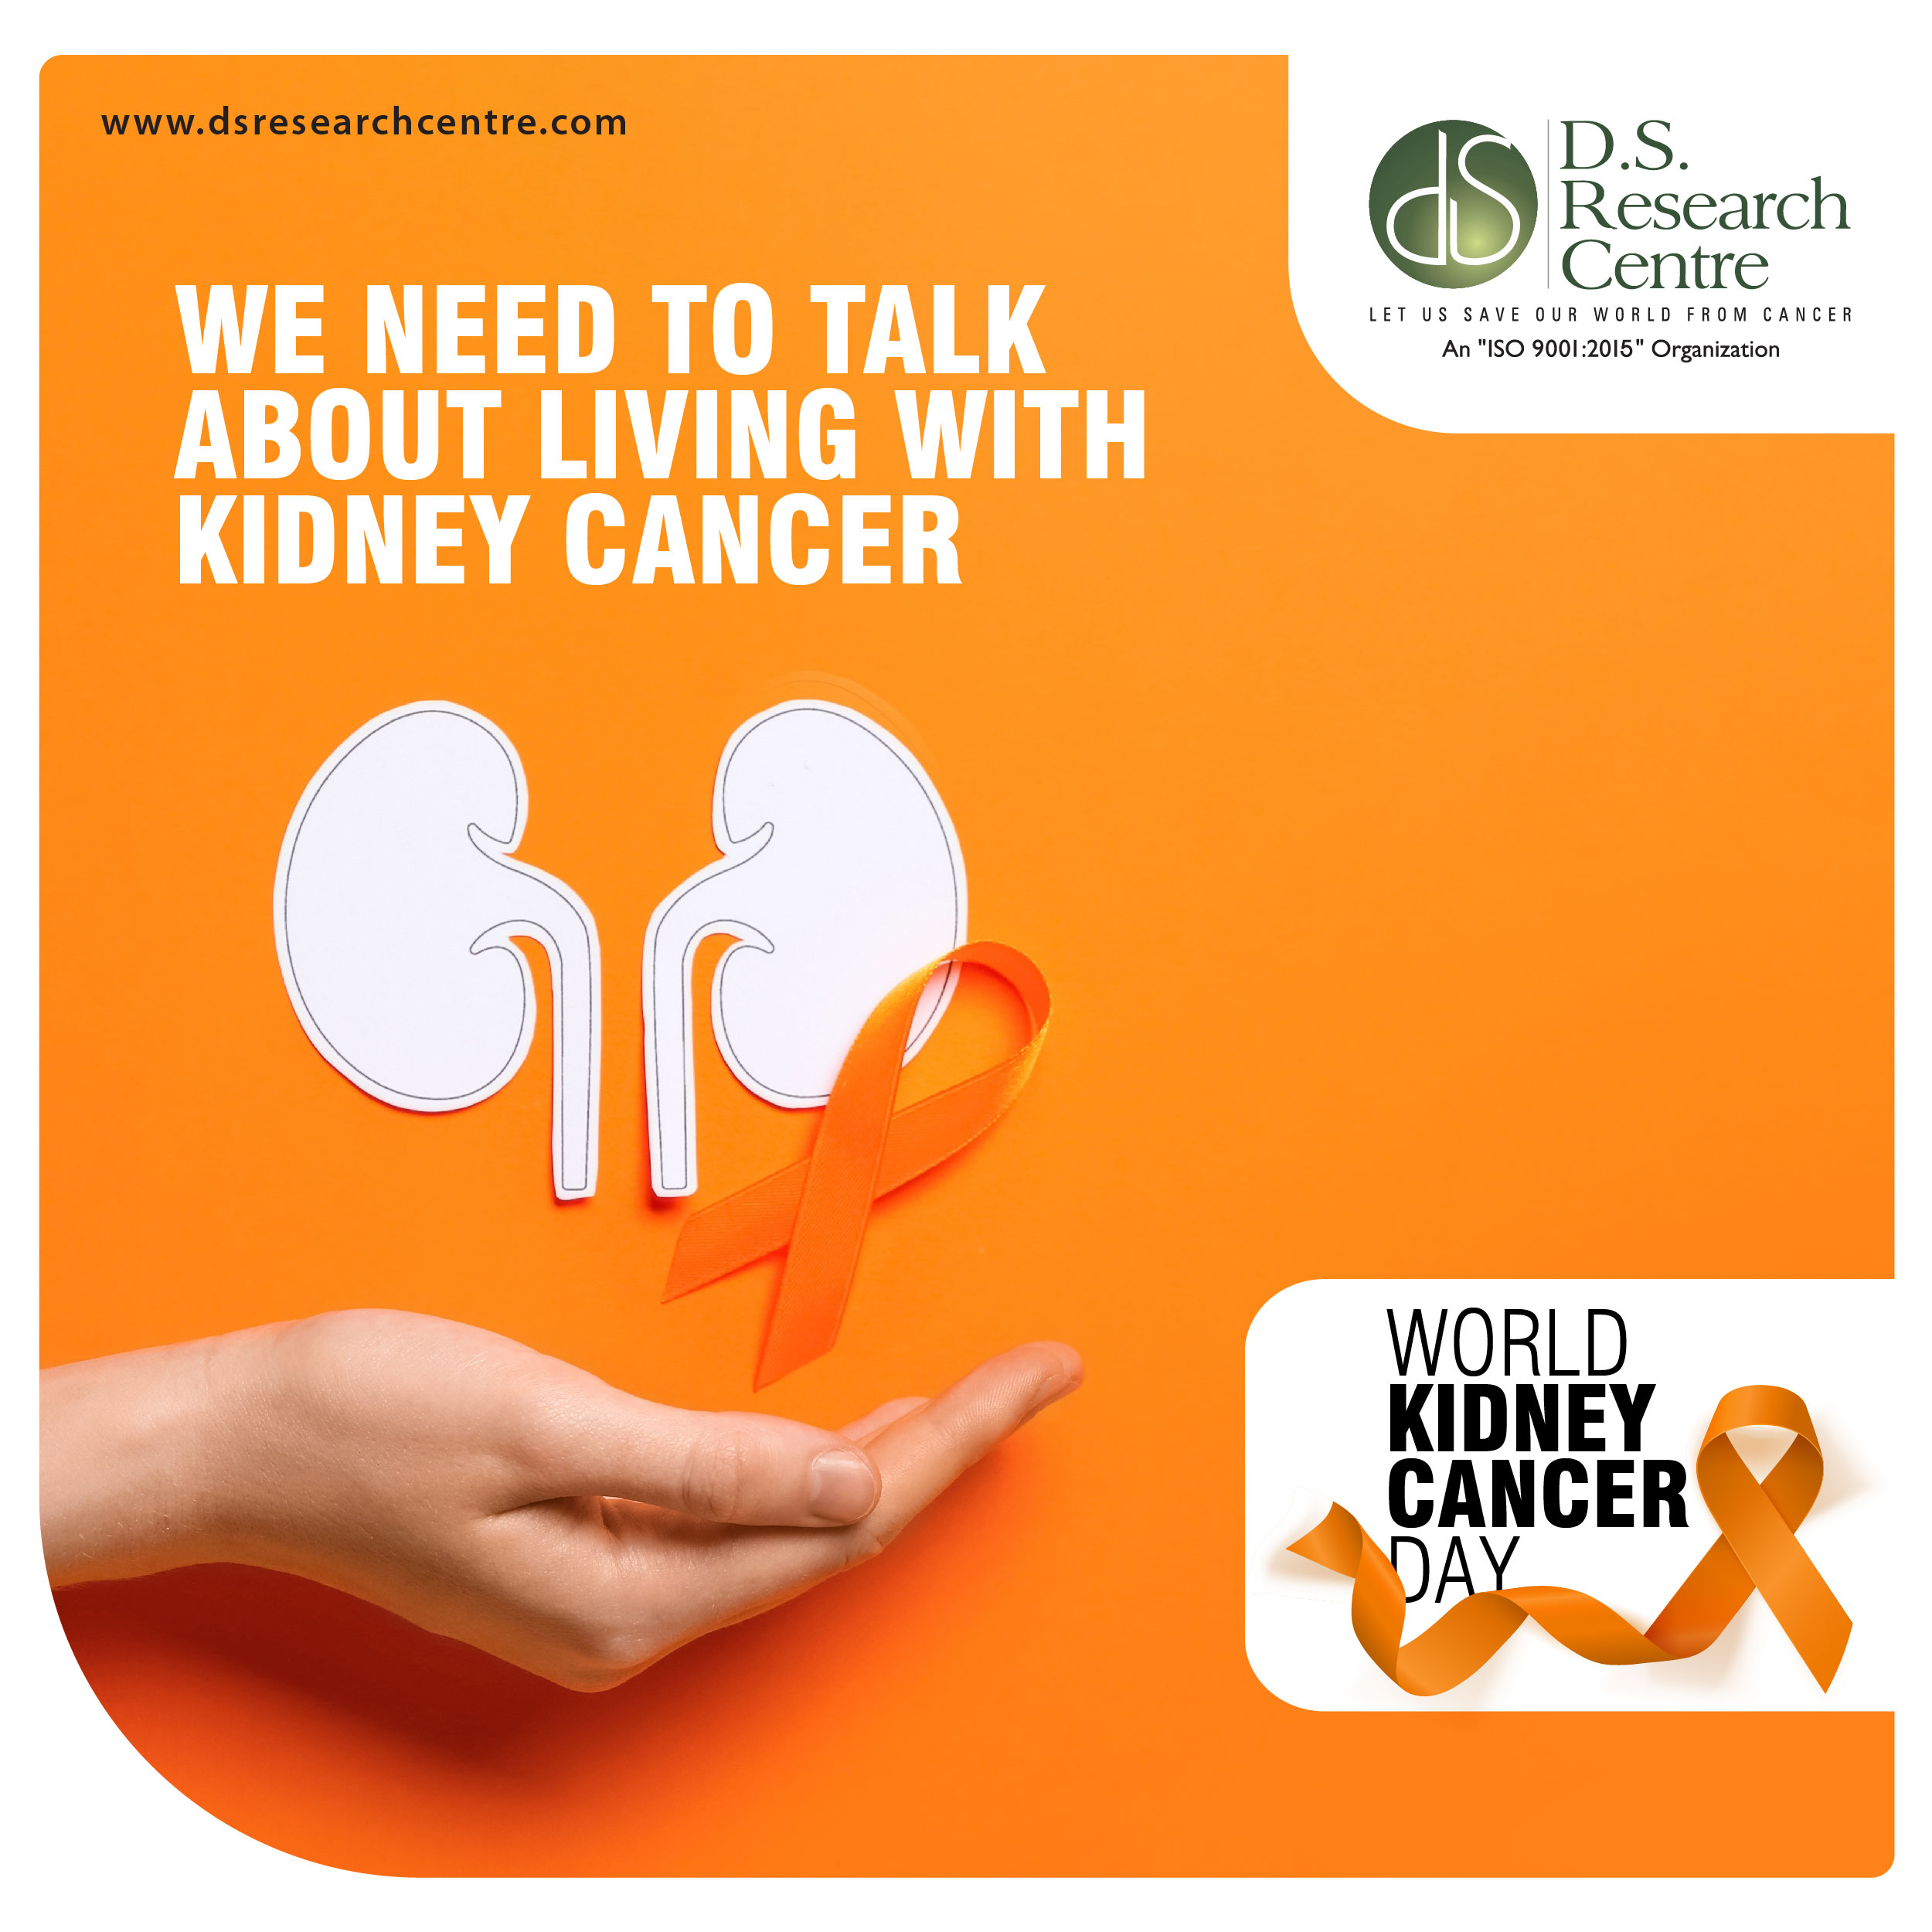 No Kidding with Kidney Cancer - World Kidney Cancer Awareness Day